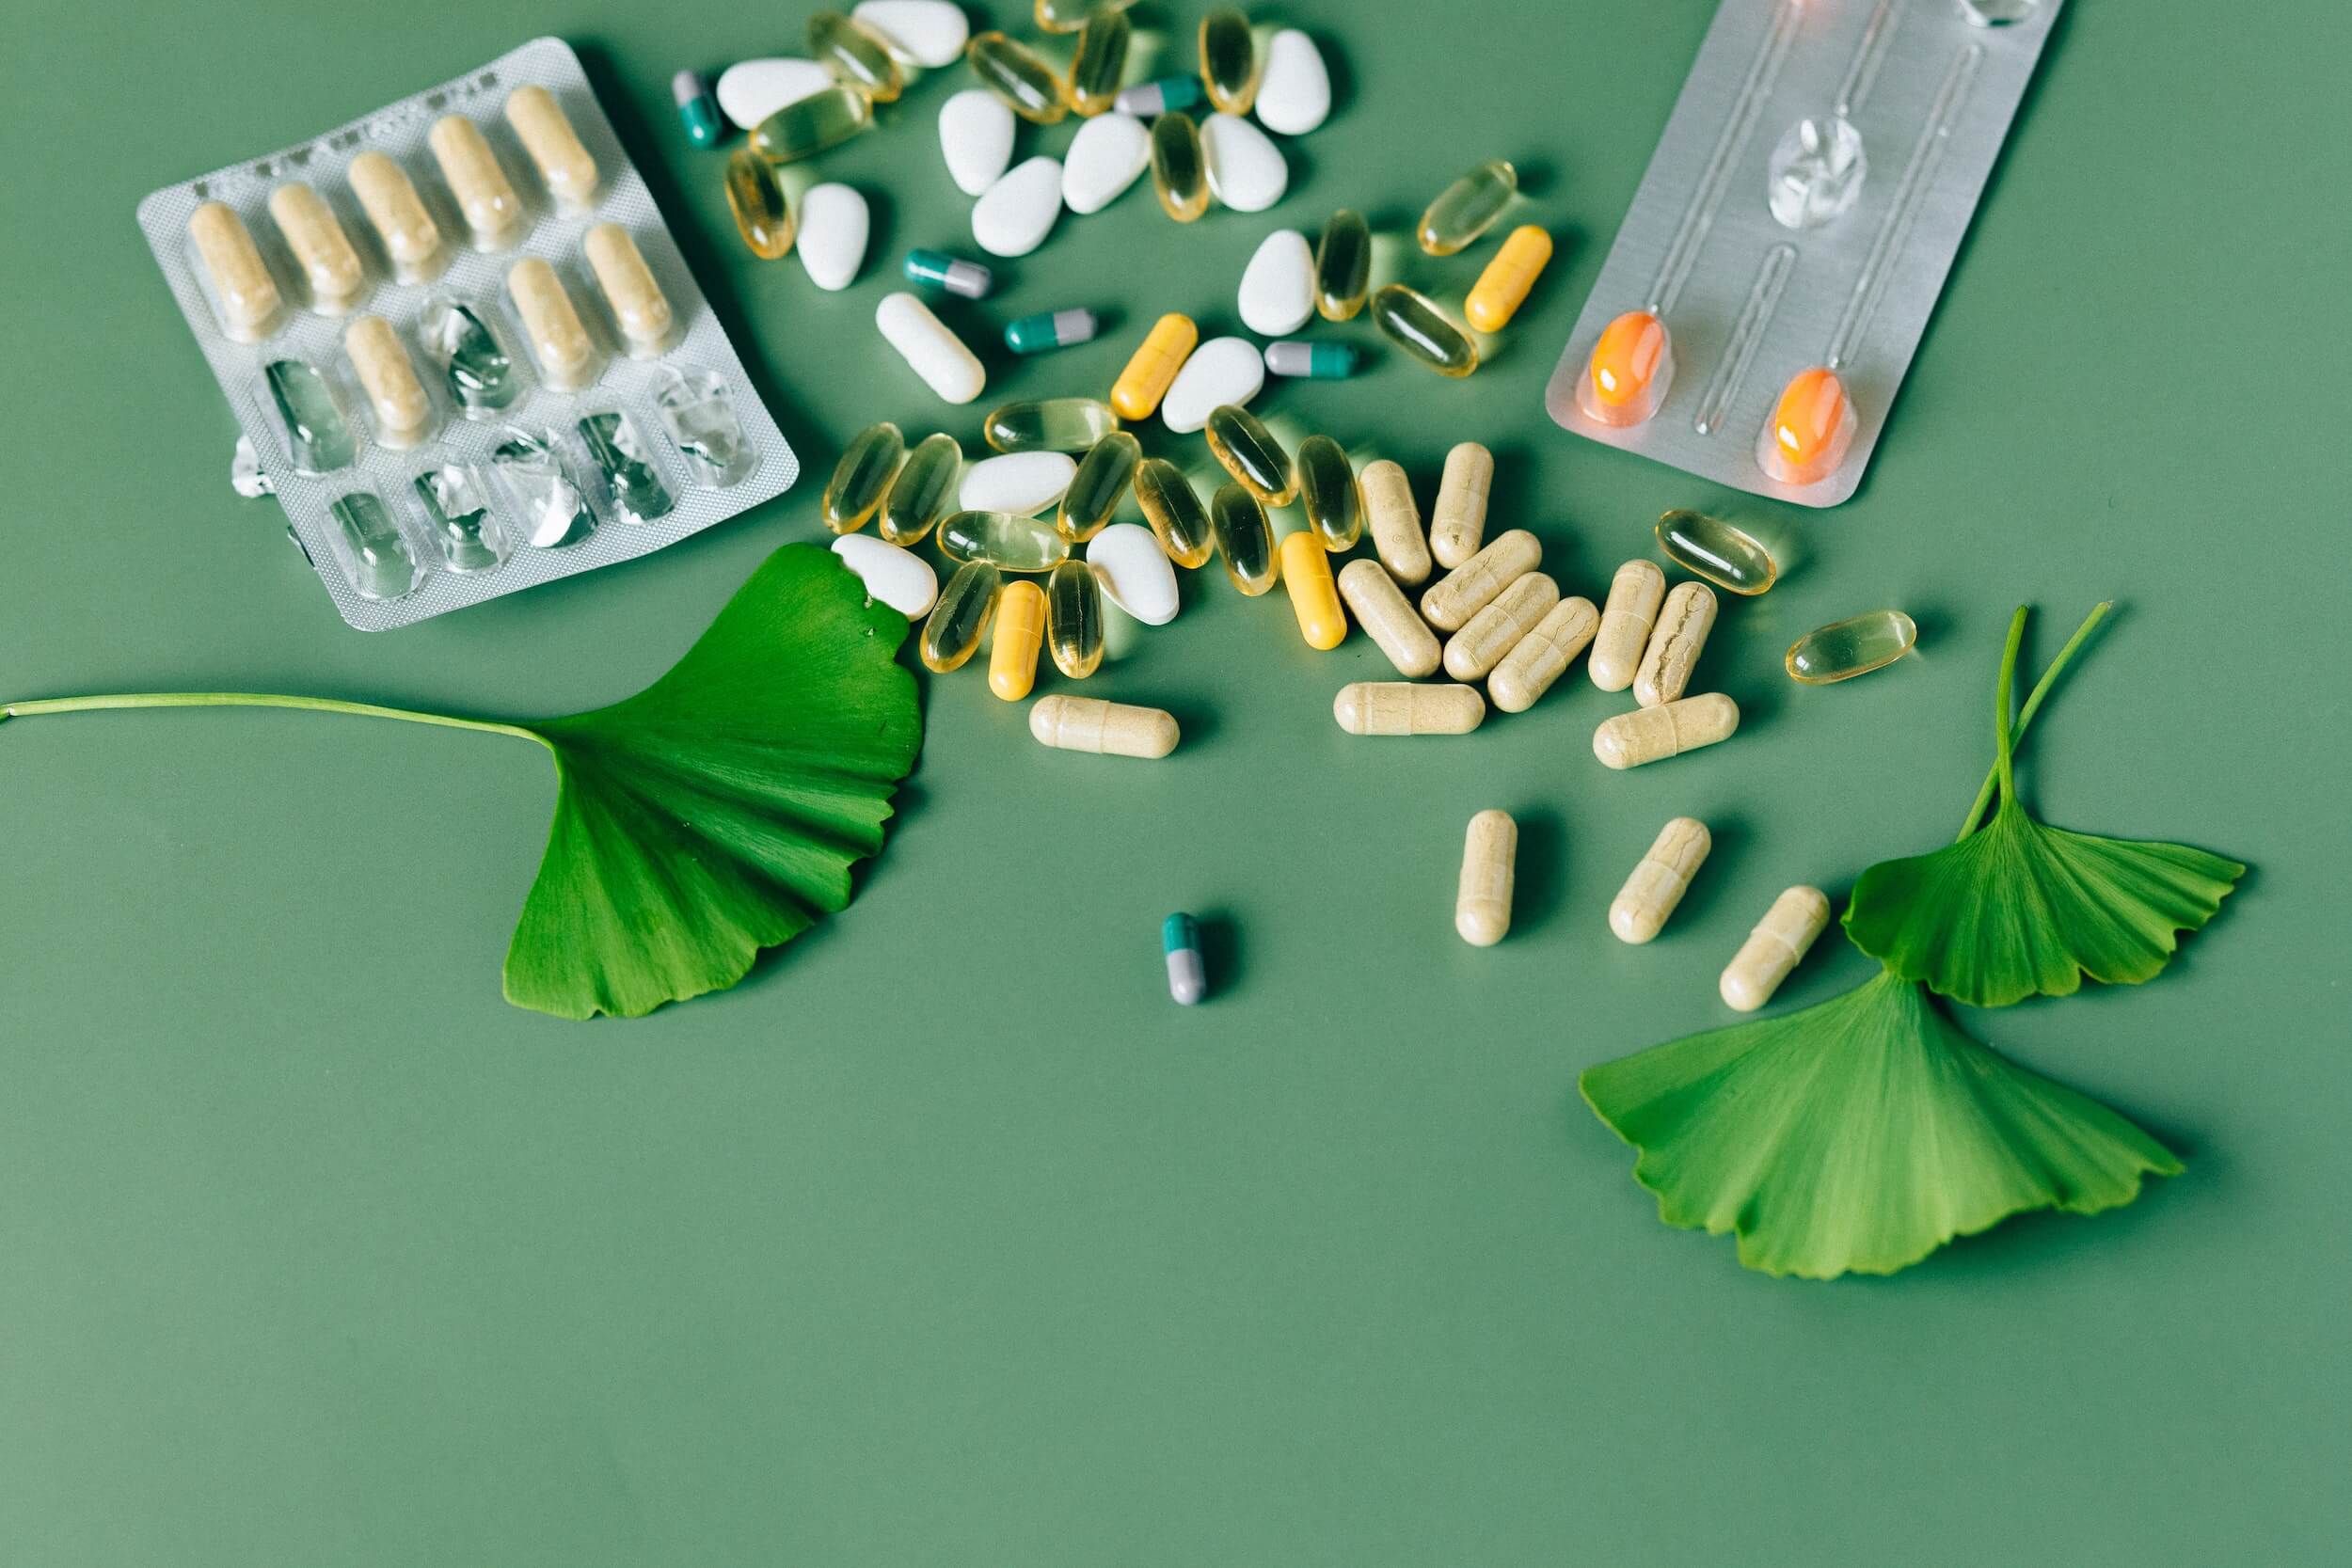 A vareity of supplements lay on a green table decorated with leaves